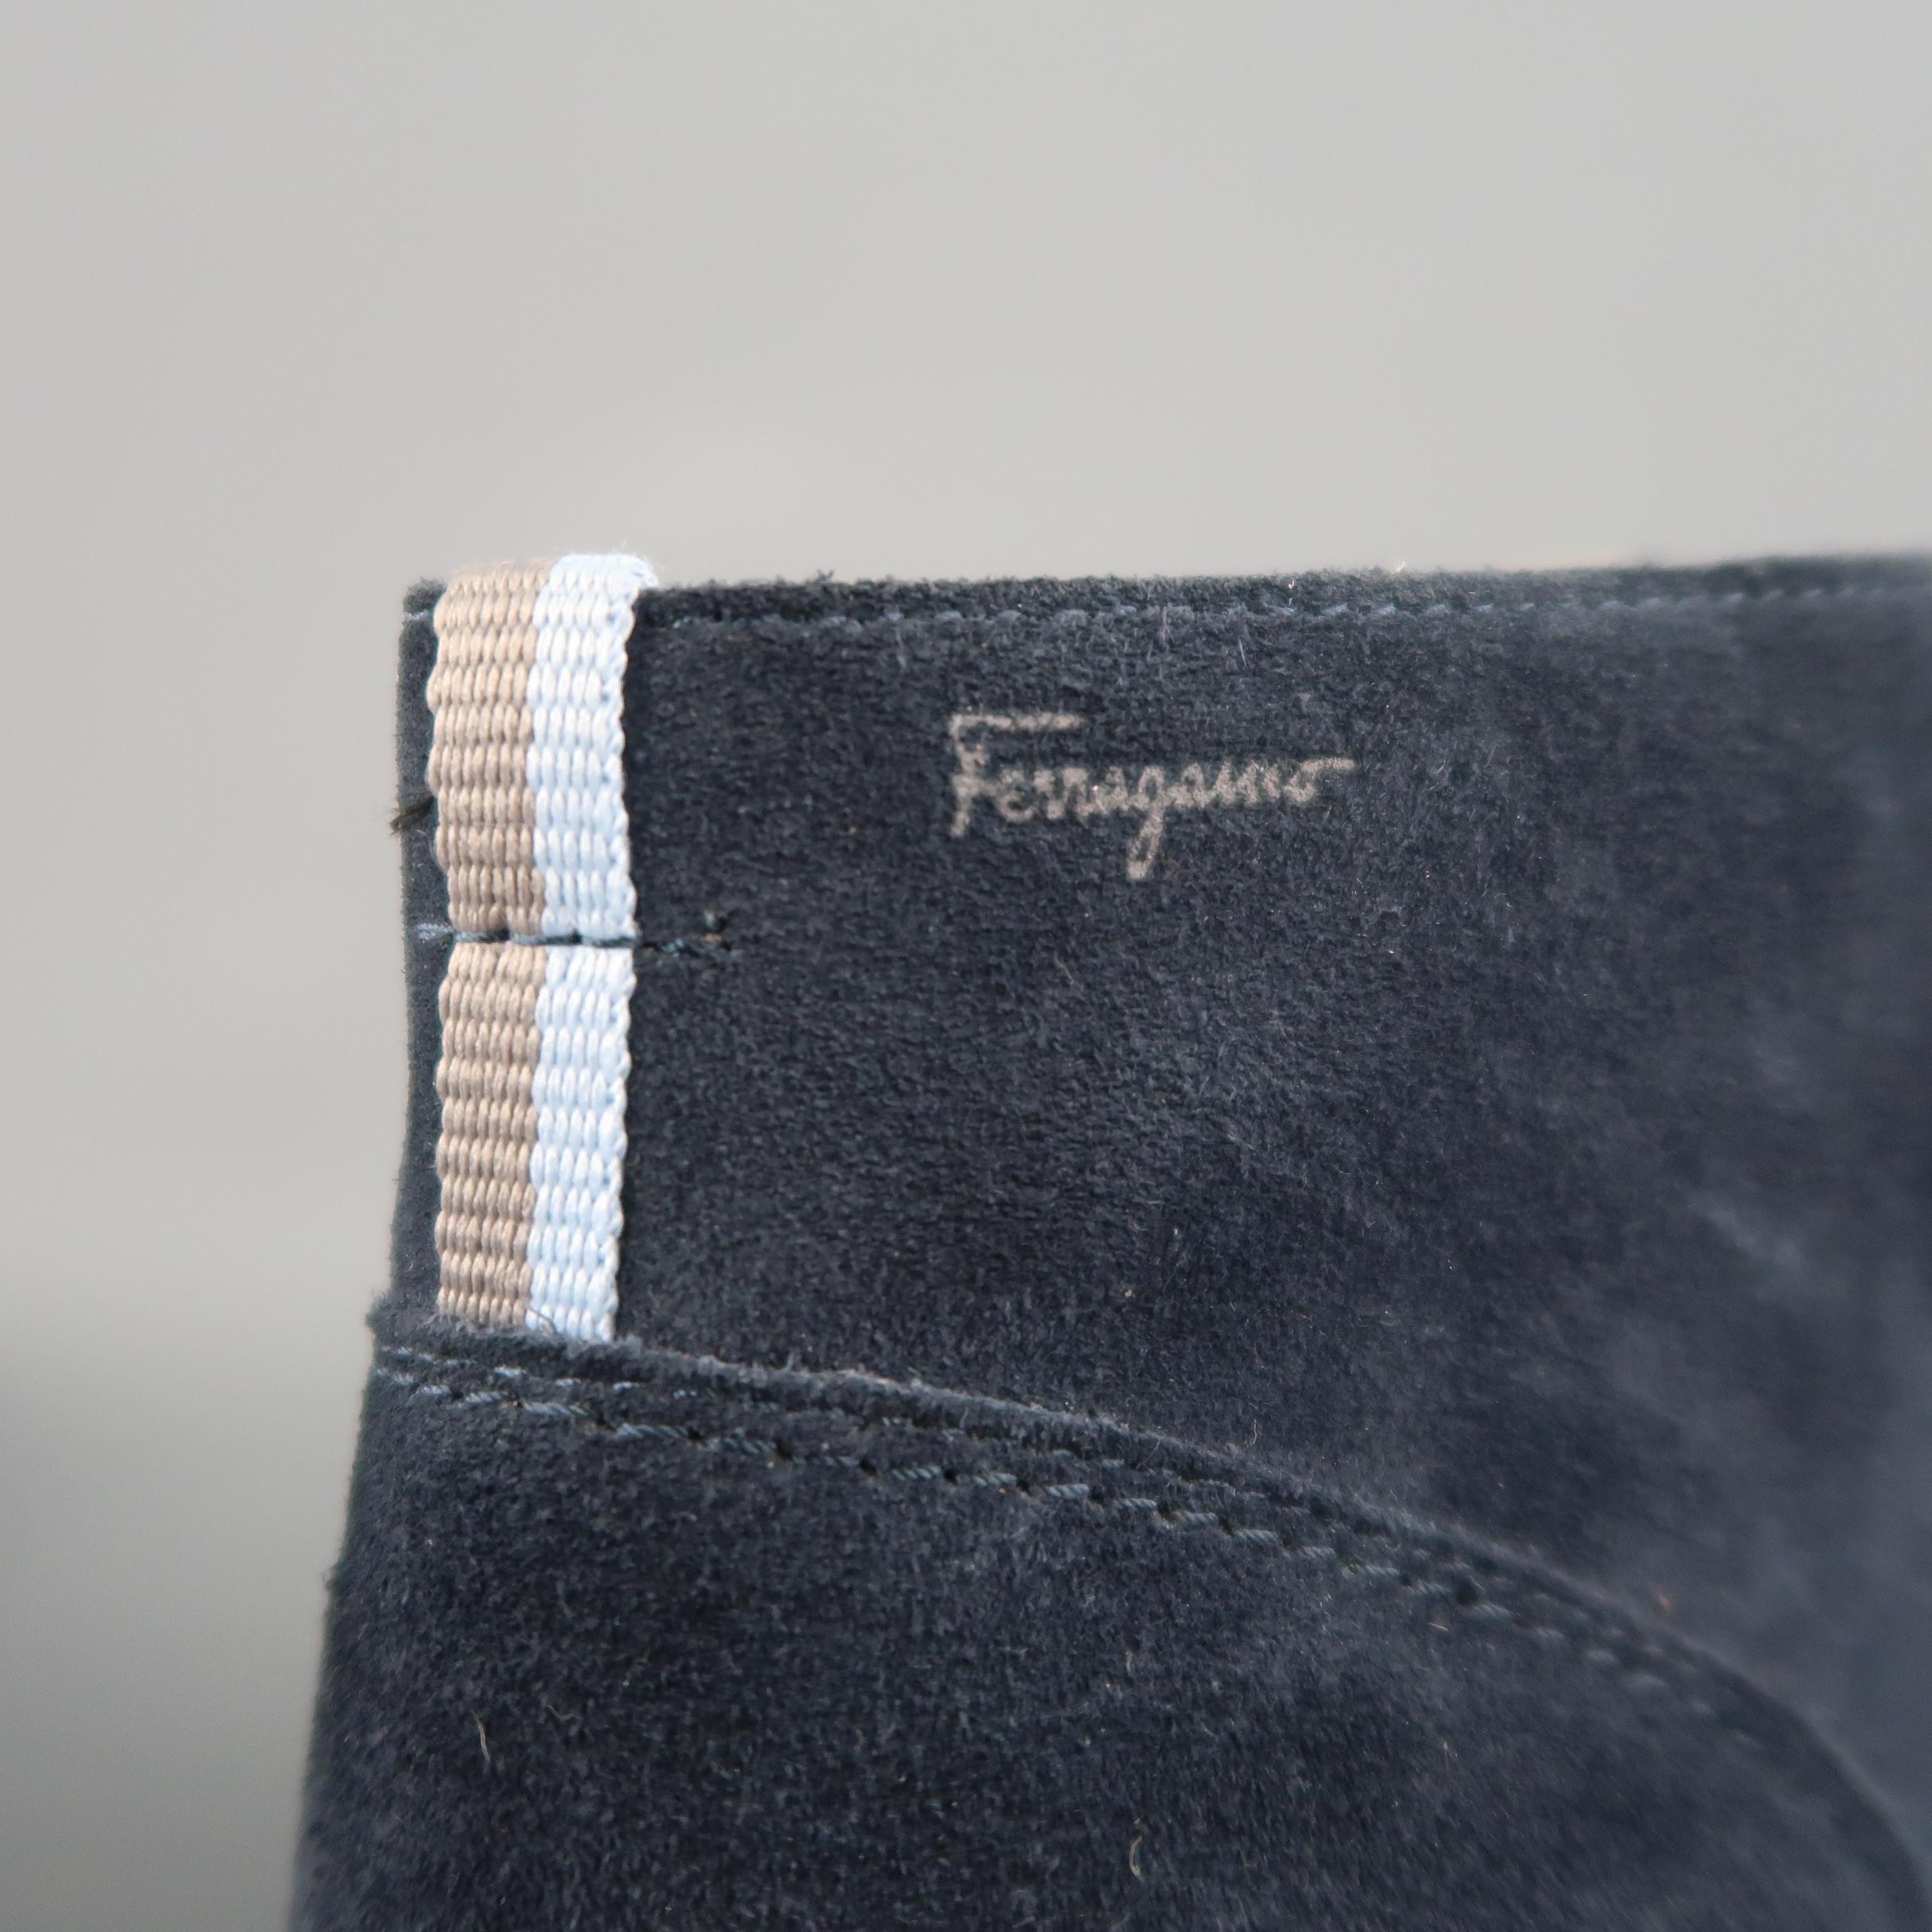 SALVATORE FERRAGAMO Size 11 Navy Solid Suede Ankle Chukka Boots 3